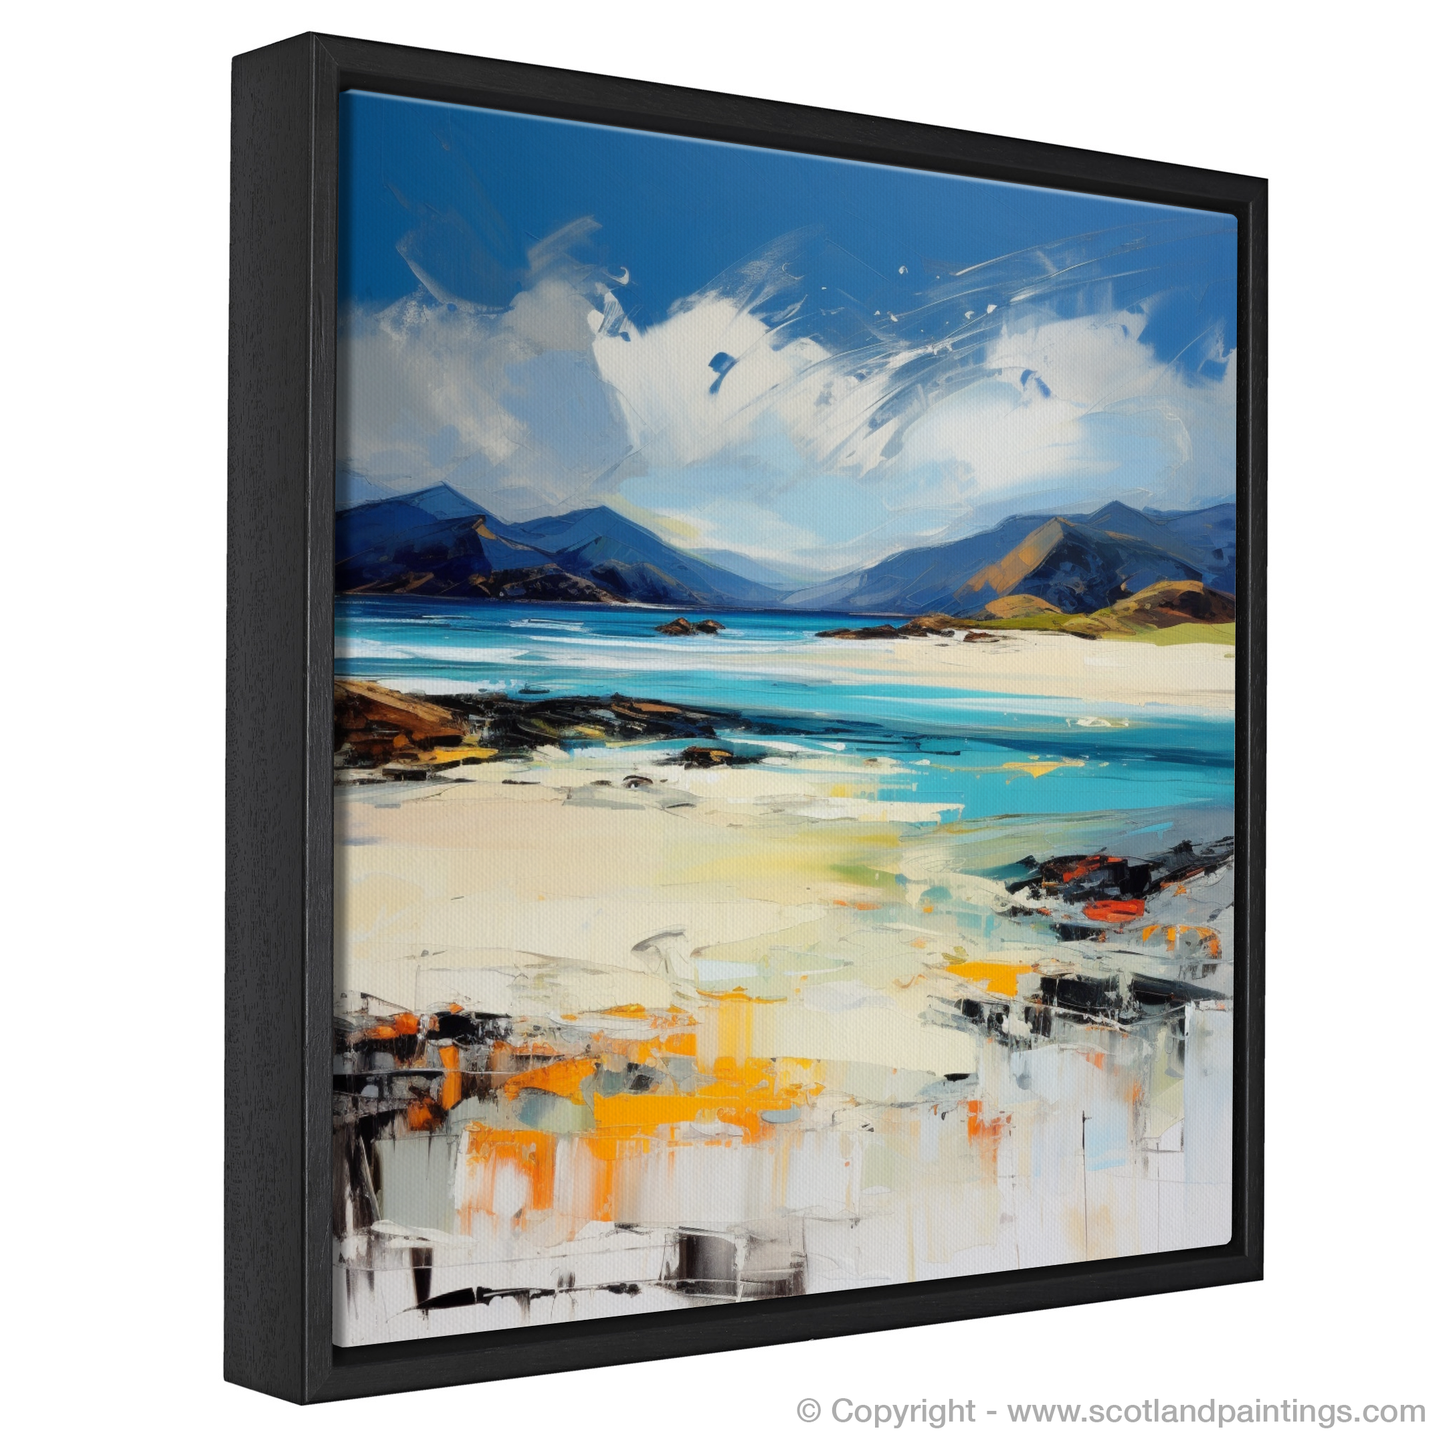 Painting and Art Print of Luskentyre Beach, Isle of Harris entitled "Luskentyre Beach Impressions: An Expressionist Ode to the Hebrides".